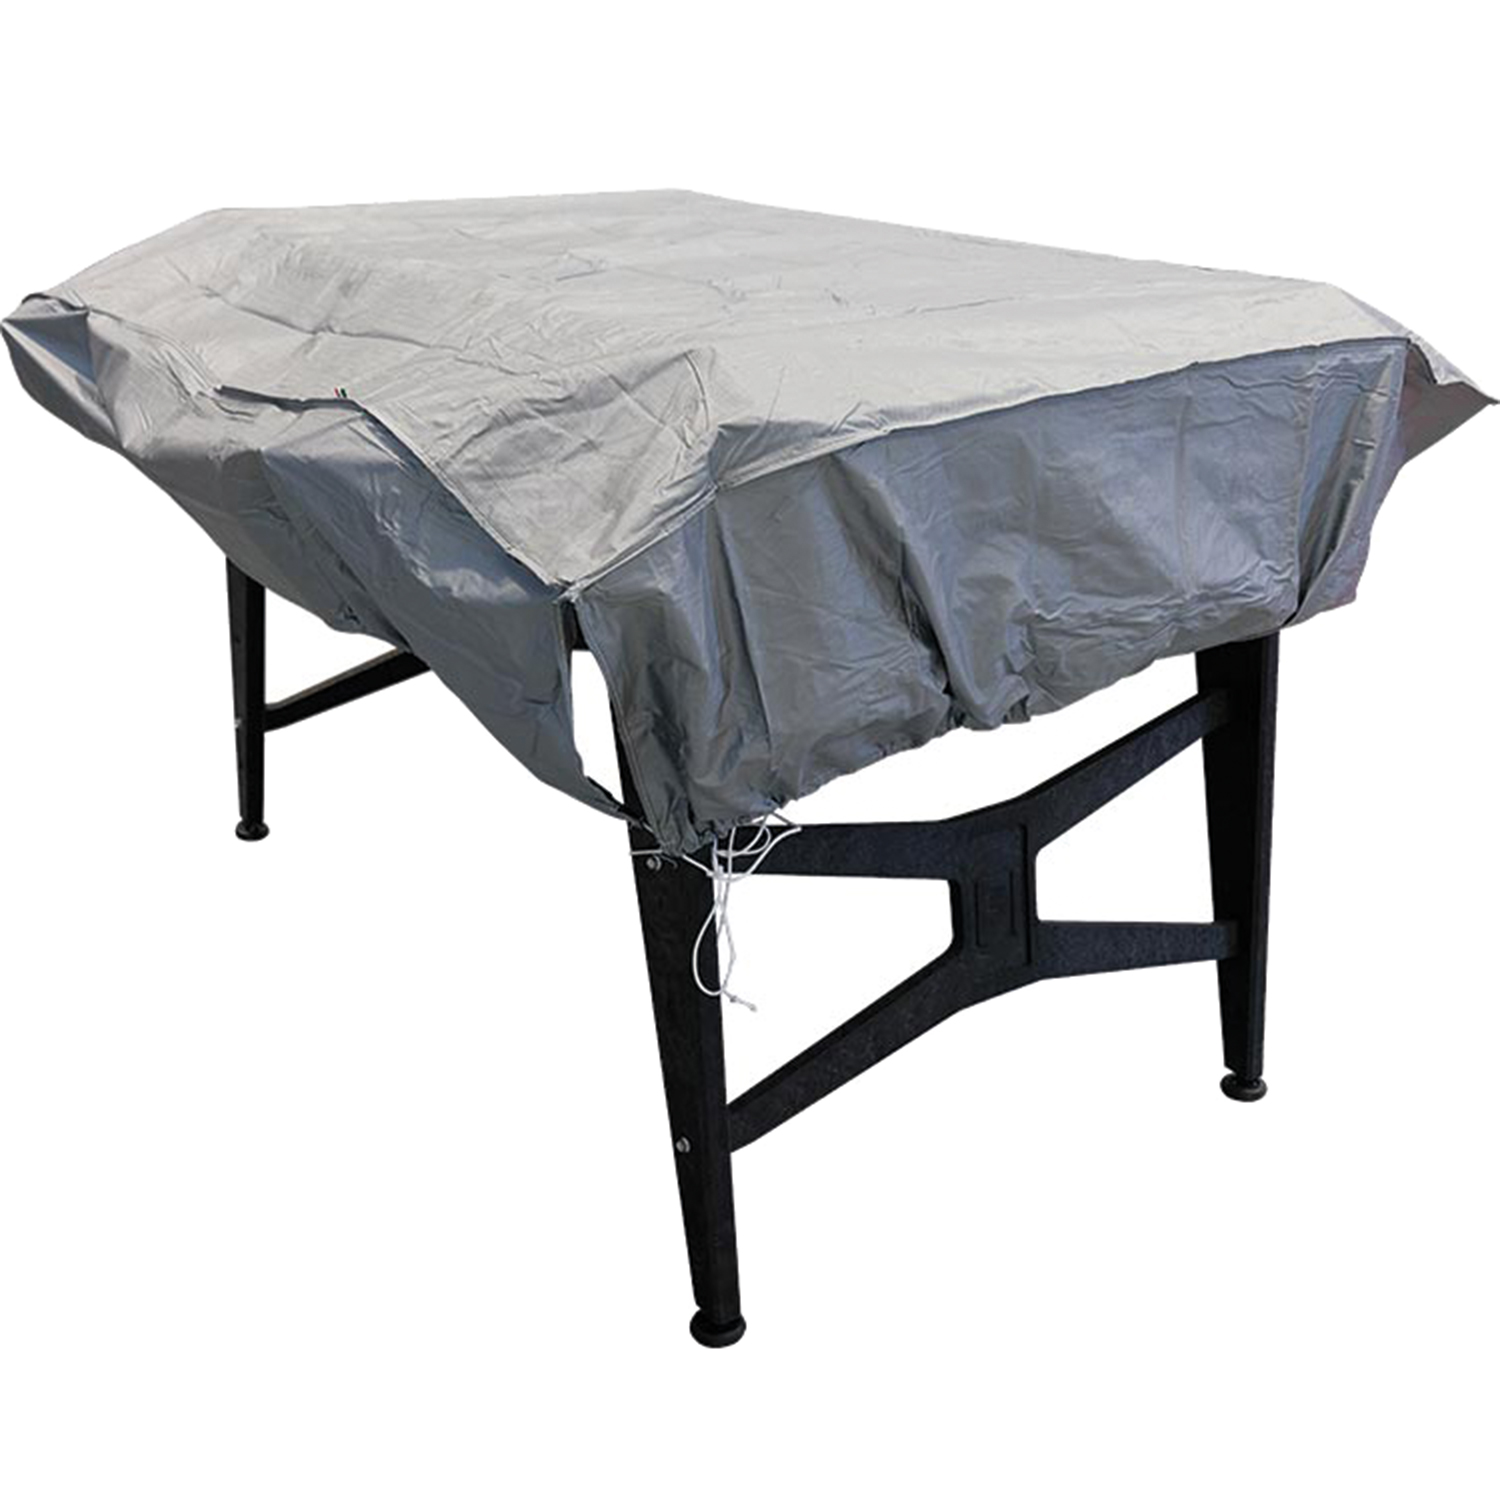 Protection cover Storm soccer table